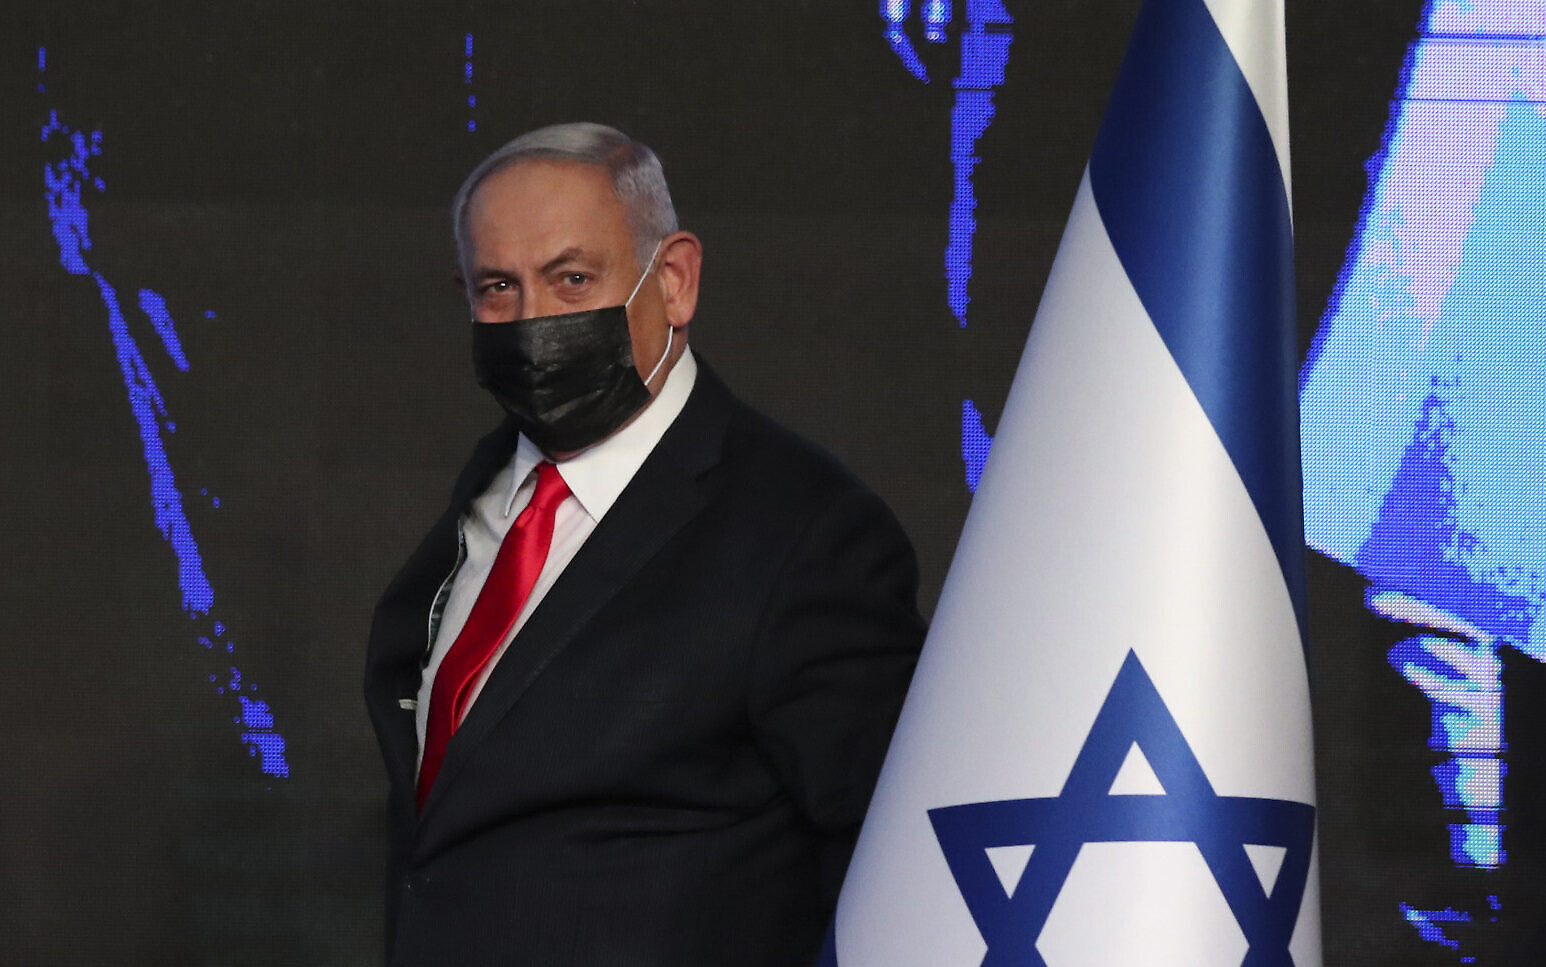 Prime Minister Benjamin Netanyahu arrives to address supporters after the March 23 elections, at his Likud party's election HQ in Jerusalem, early on Wednesday, March. 24, 2021. (AP Photo/Ariel Schalit)